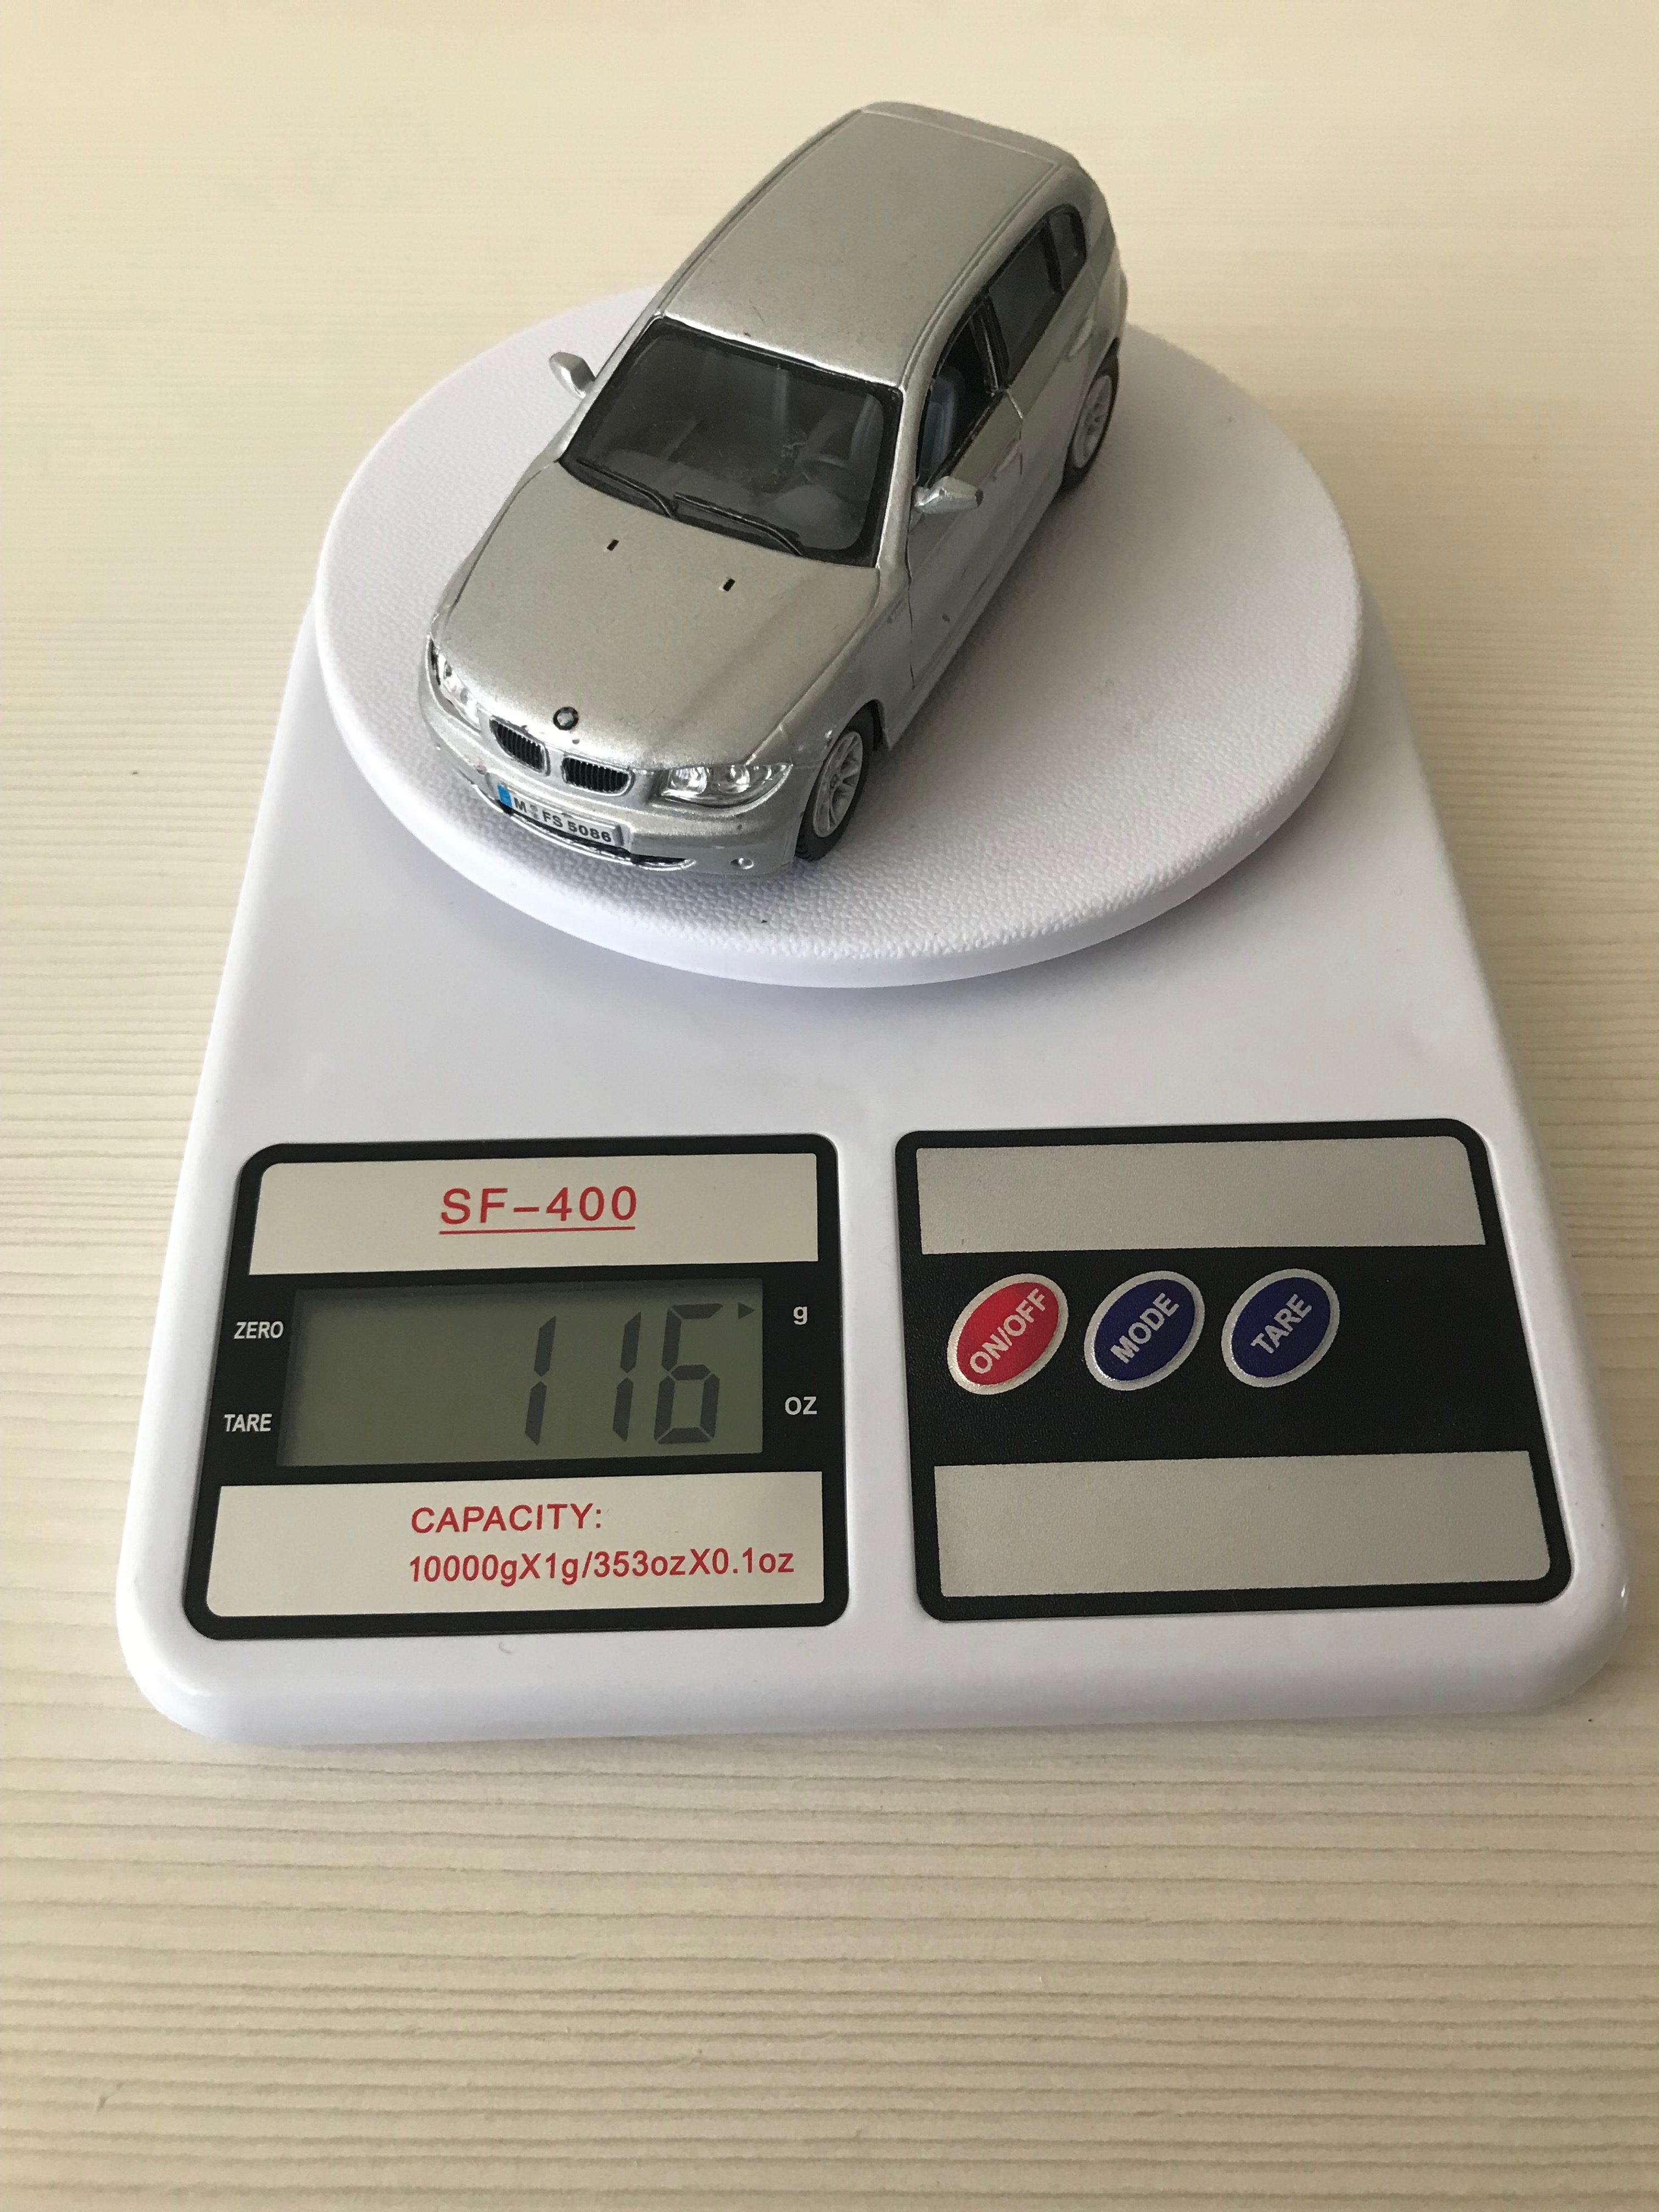 How much does a car model weigh?